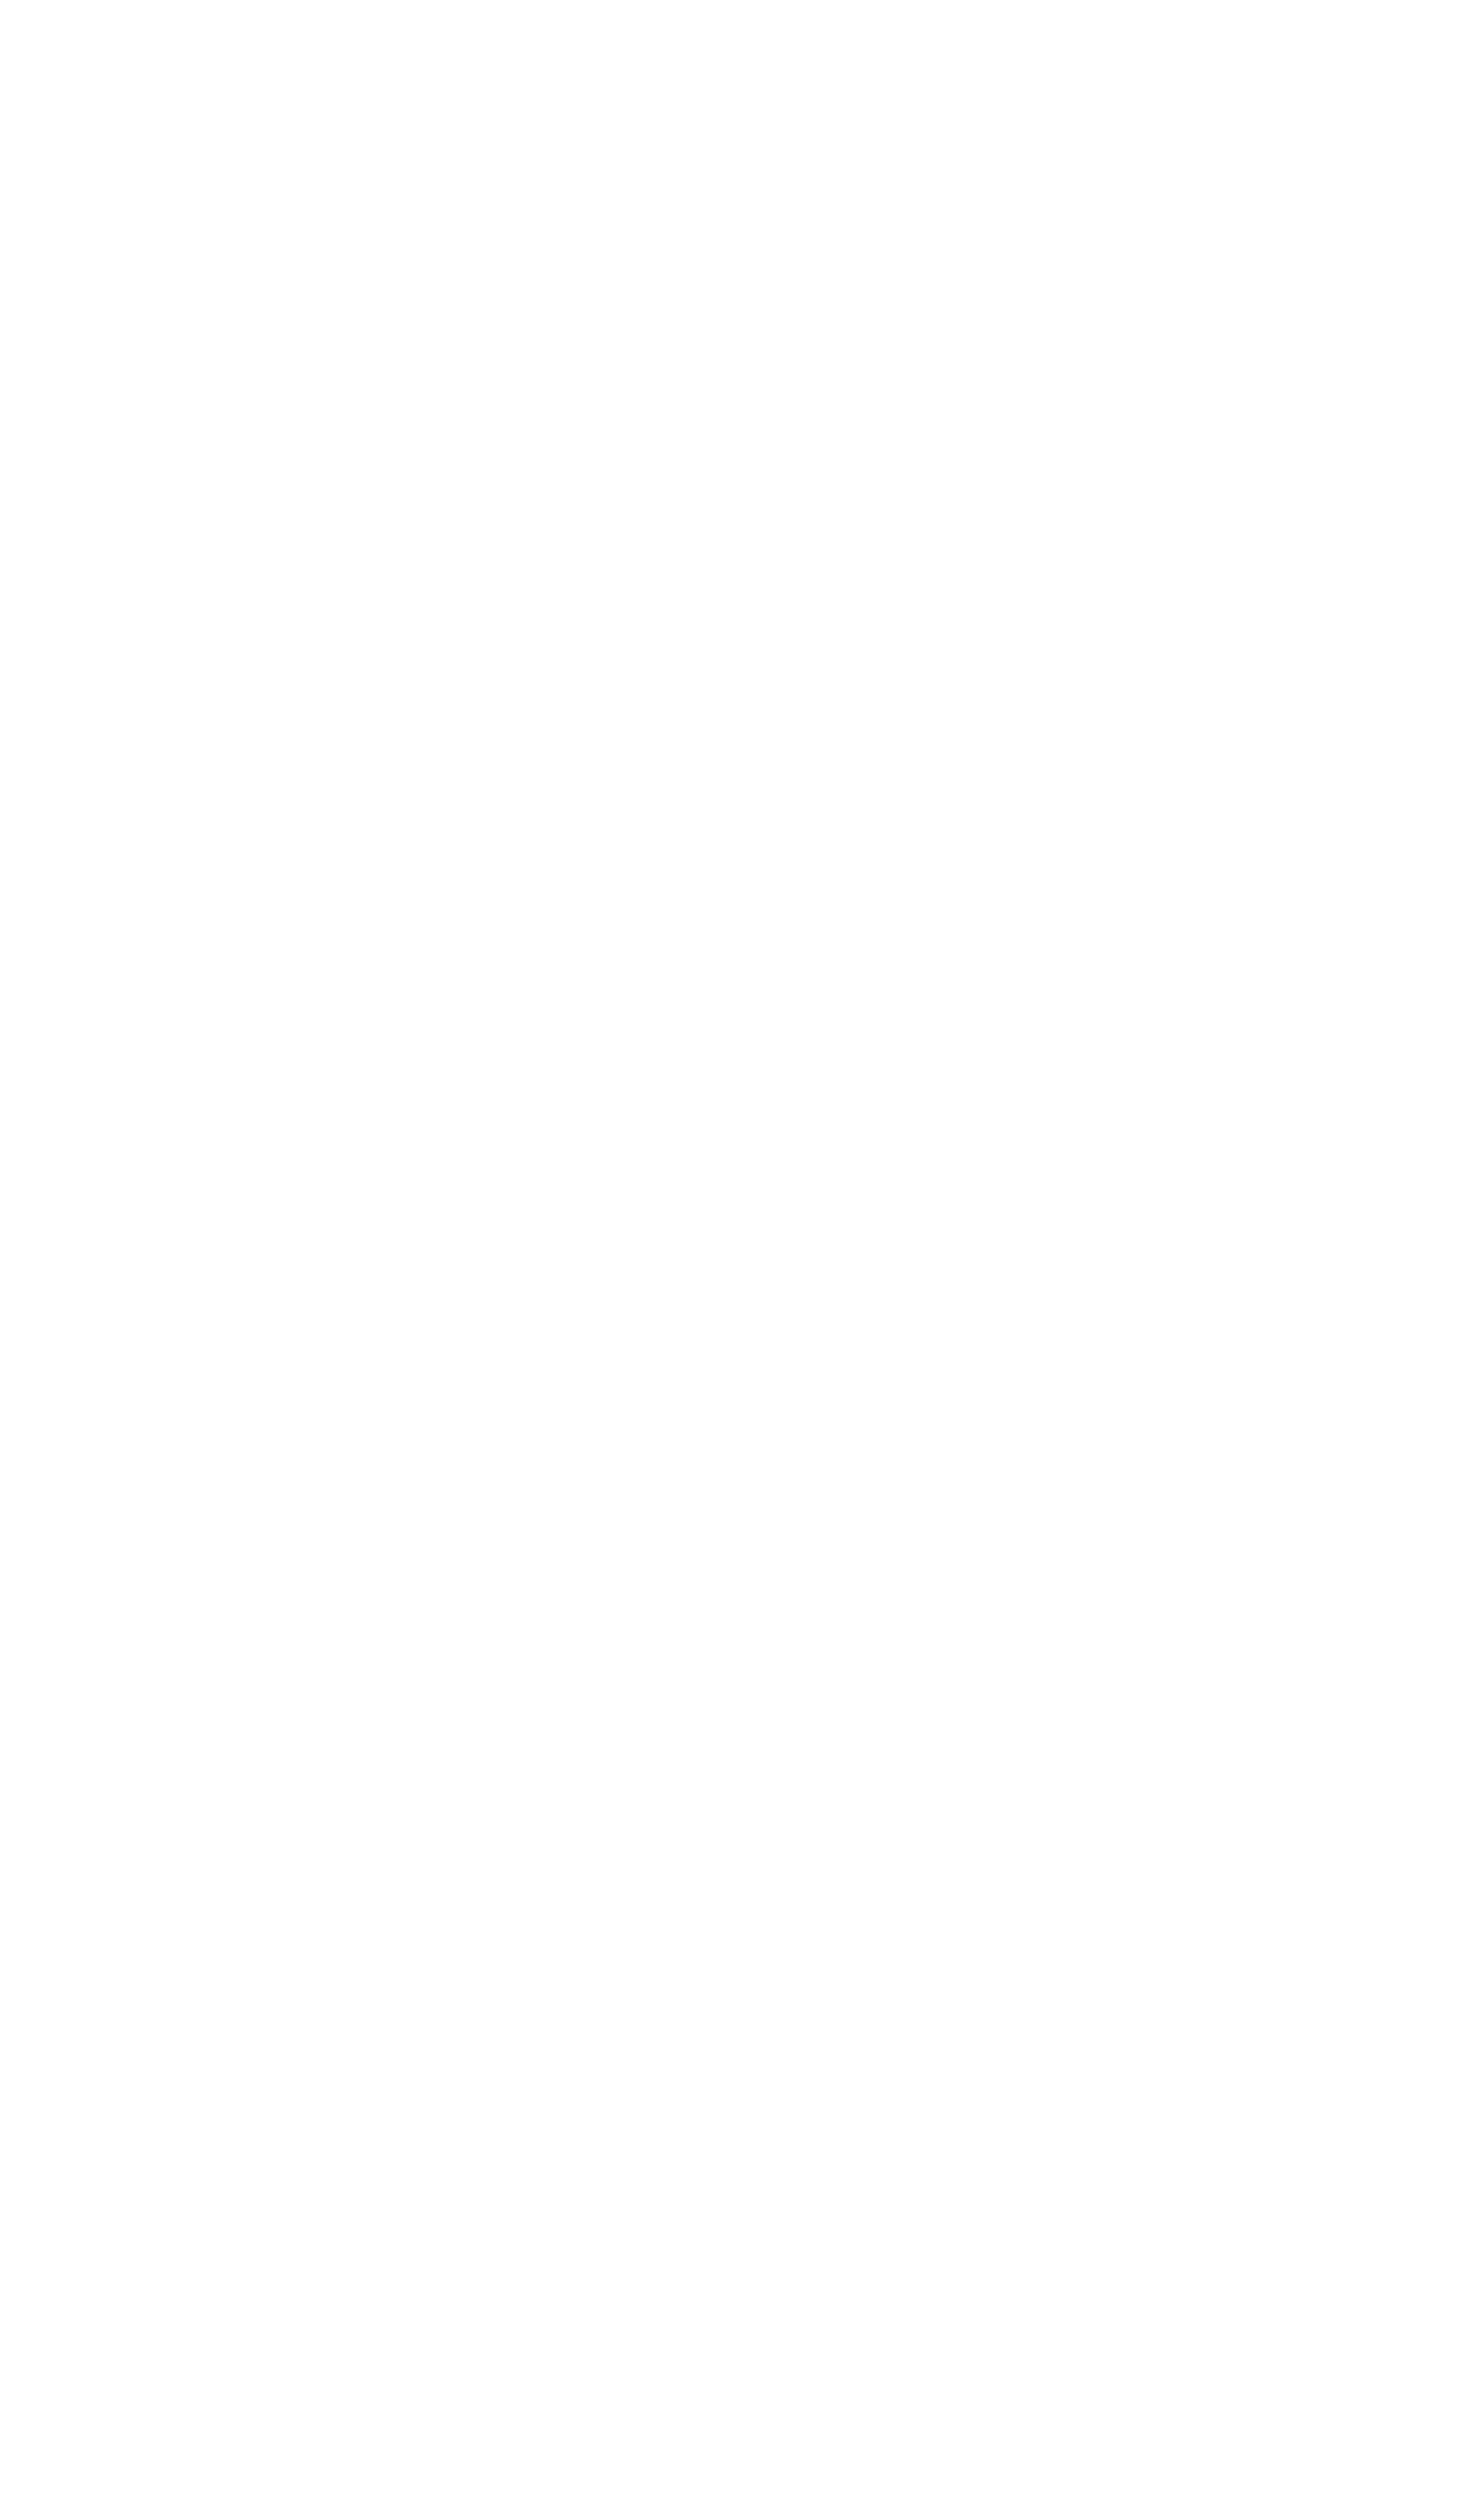 We deliver. All the agreed upon deliverables for you business or brand